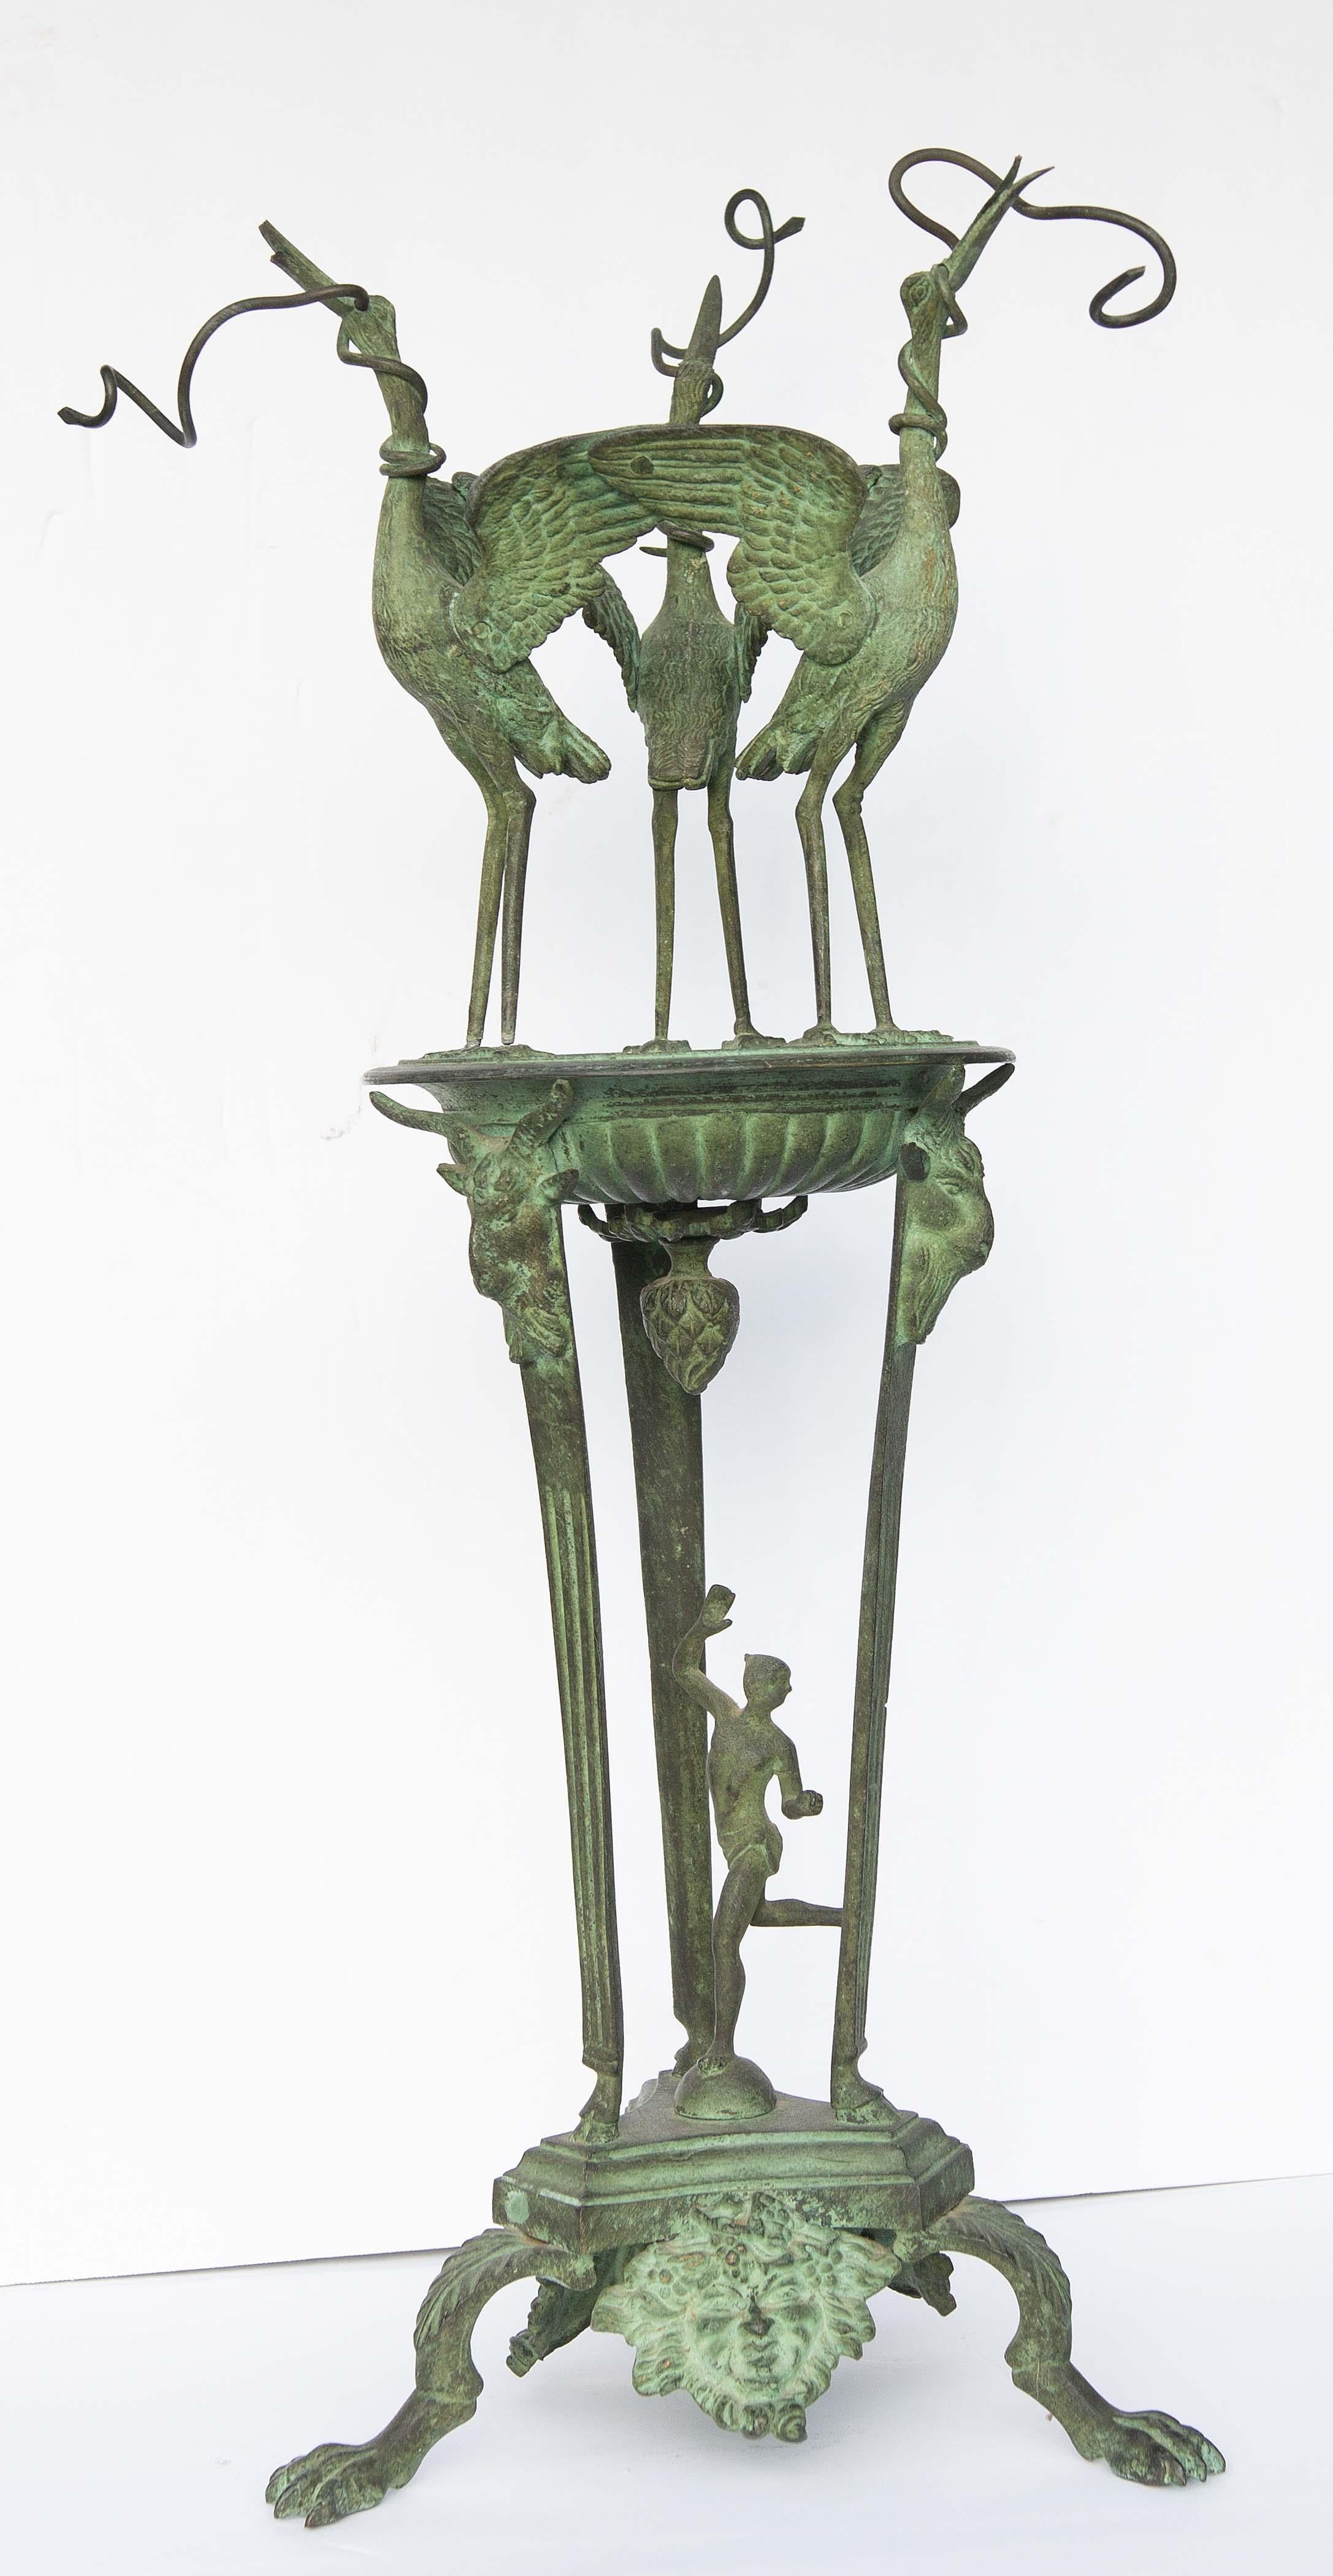 Roman verdigris bronze oil lamp. Flying cranes with running Mercury. After the original found in Pompeii. This lamp base would originally have had small oil lamps hanging from the crane's beak. 19th century grand